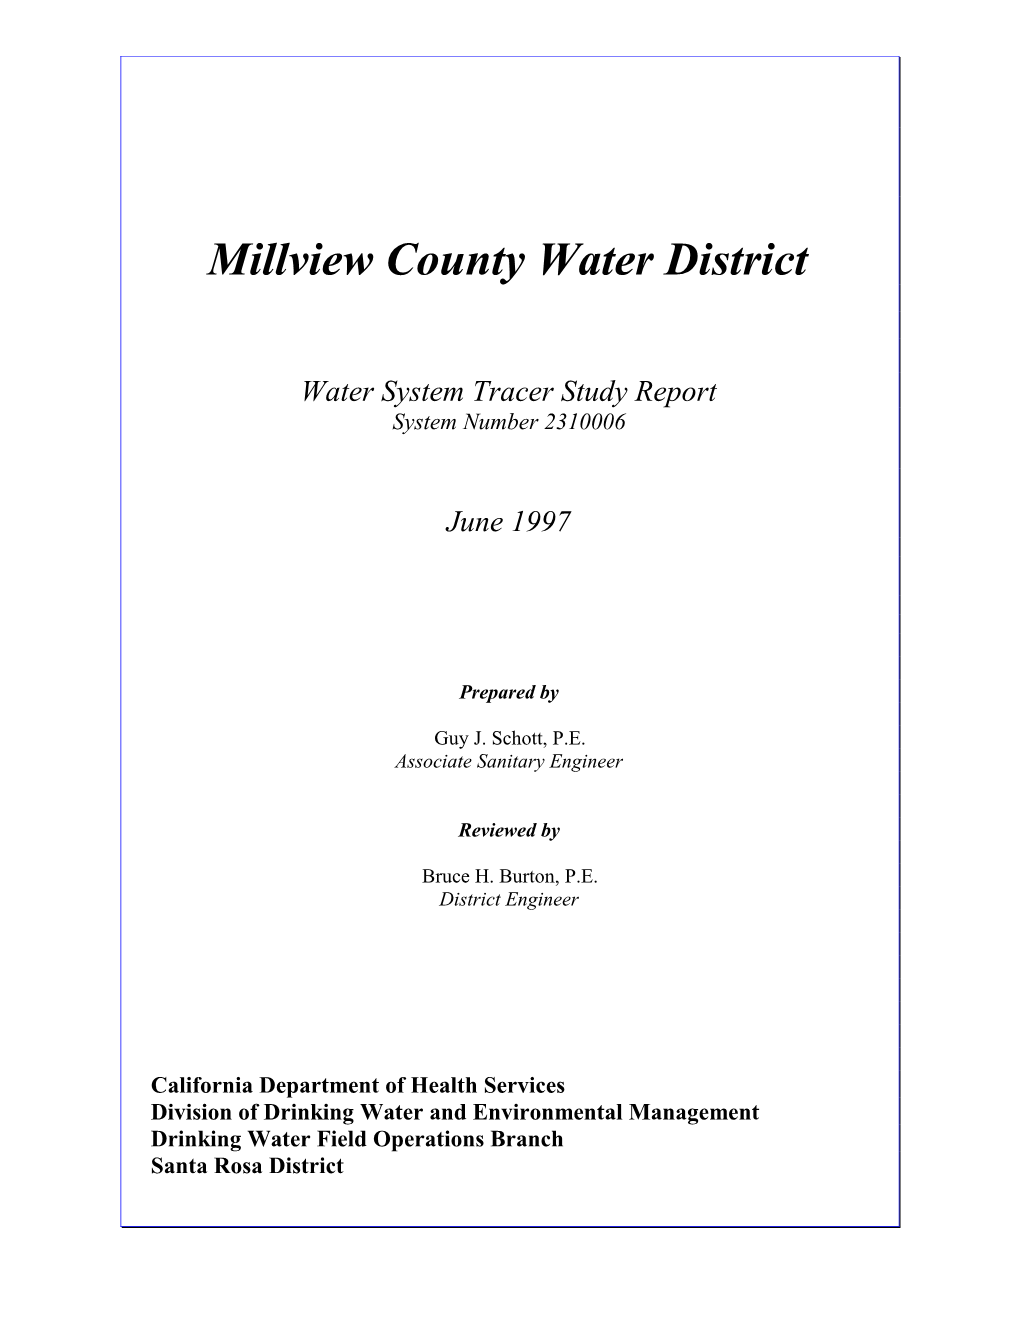 Millview County Water District - Tracer Study